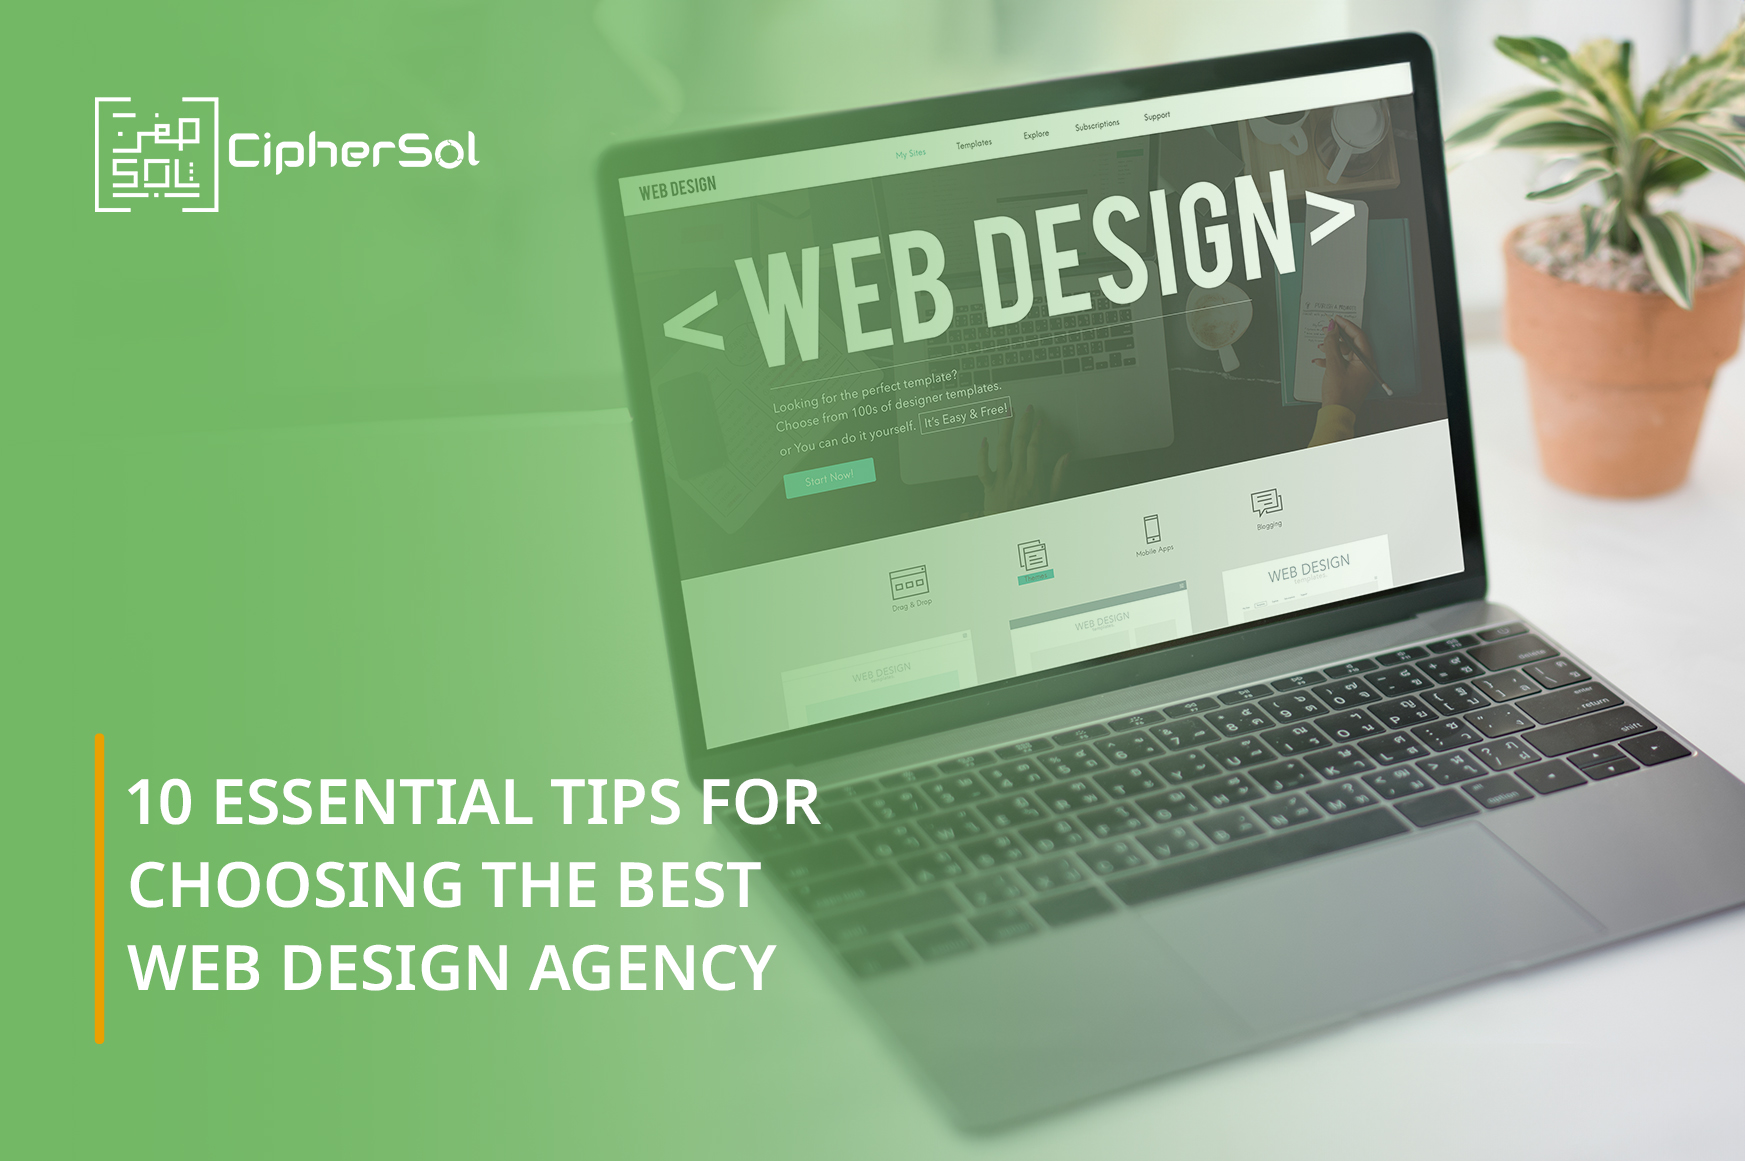 10 Essential Tips for Choosing the Best Web Design Agency